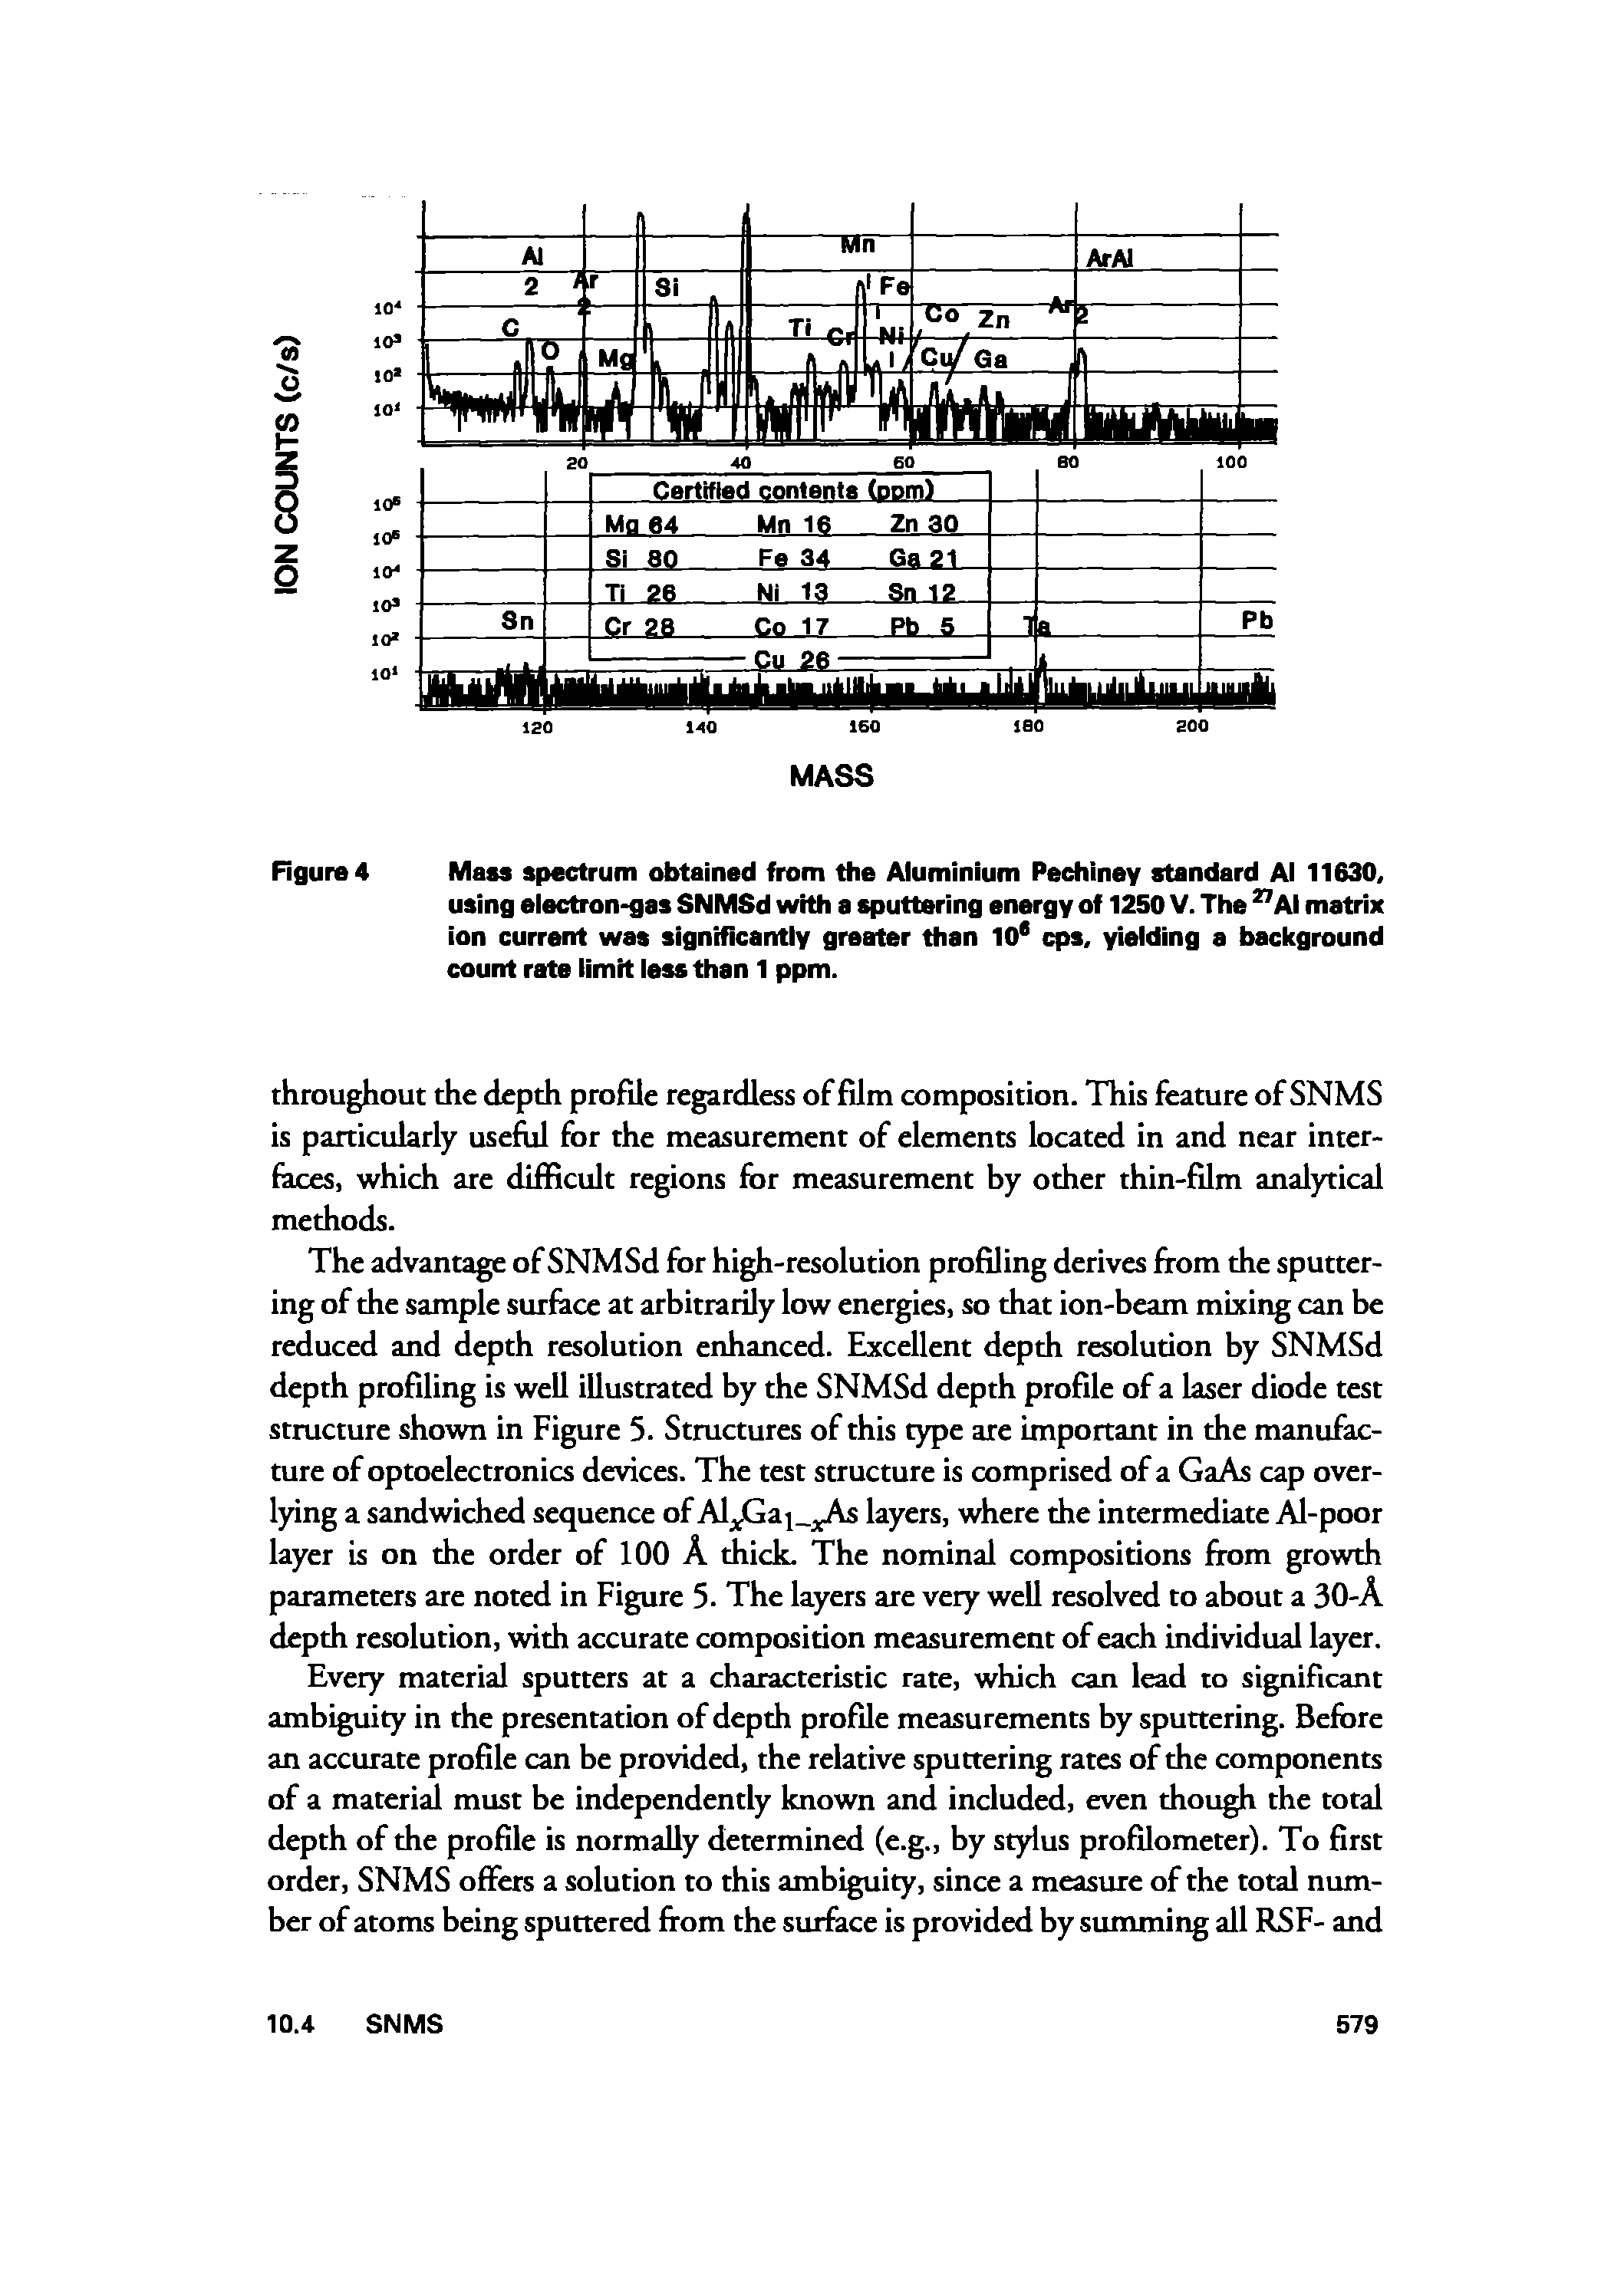 Figure 4 Mass spectrum obtained from the Aiuminium Peehiney standard Ai 11630, using eiectron-gas SNMSd with a sputtering energy of 1250 V. The AI matrix ion currerrt was significantly greater than 10 cps. yielding a background courrt rate limit less than 1 ppm.